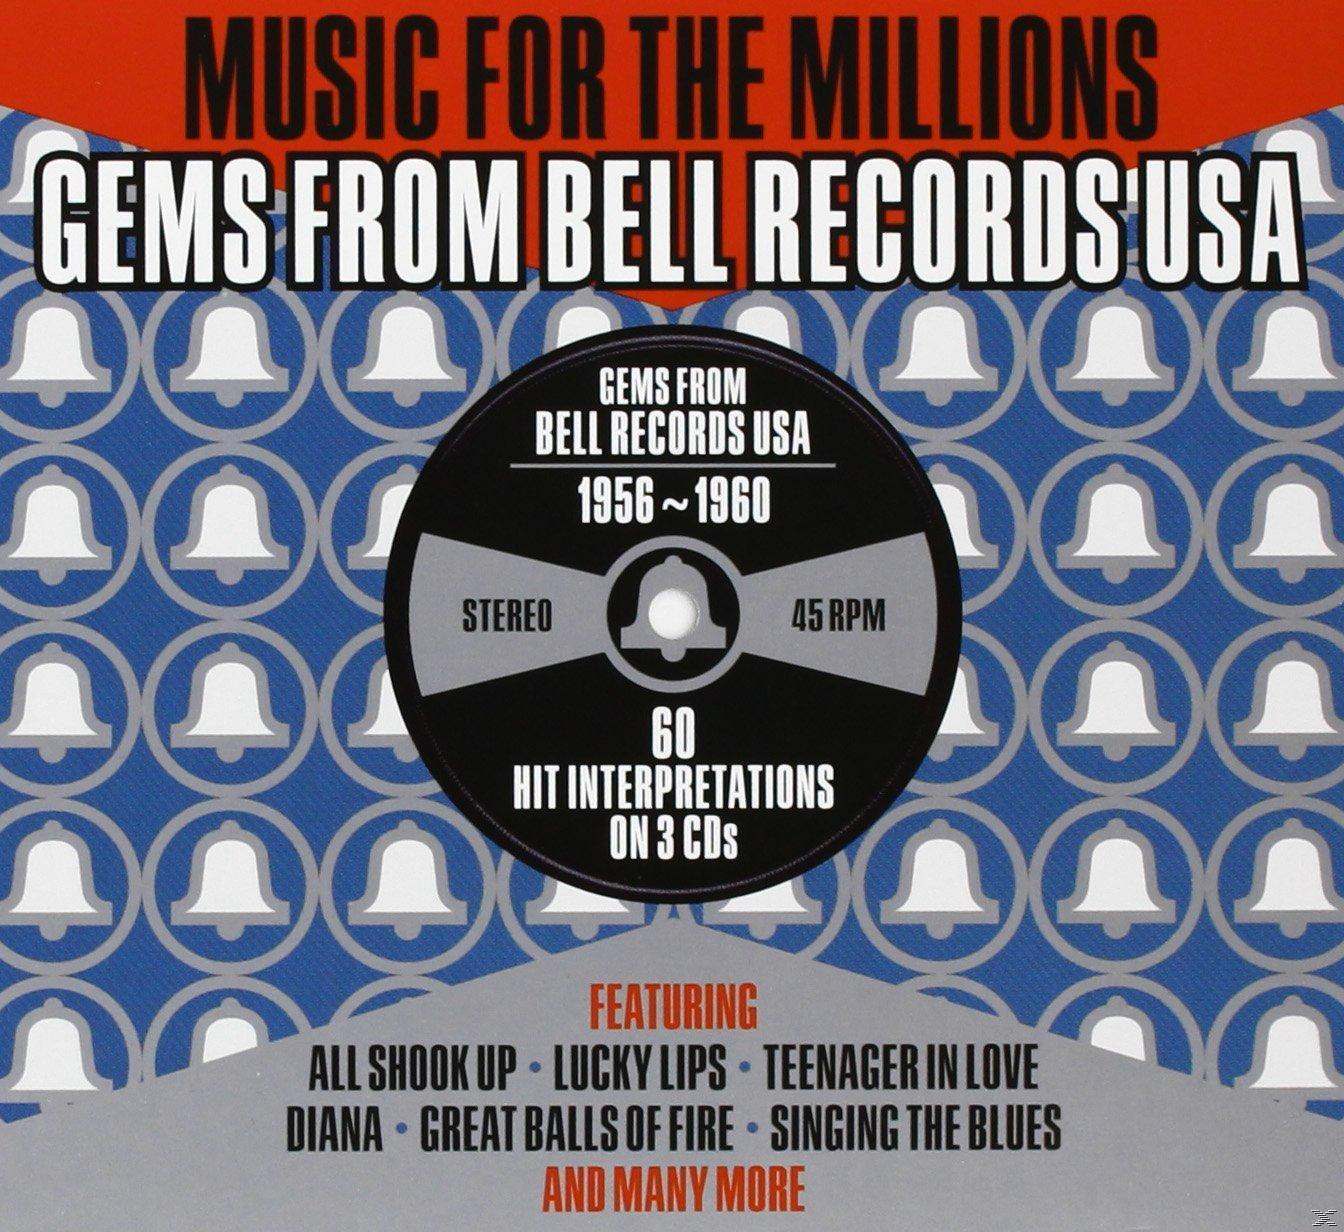 VARIOUS - The Millions-Bell For 1956-60 Rec.Usa (CD) Story - Music